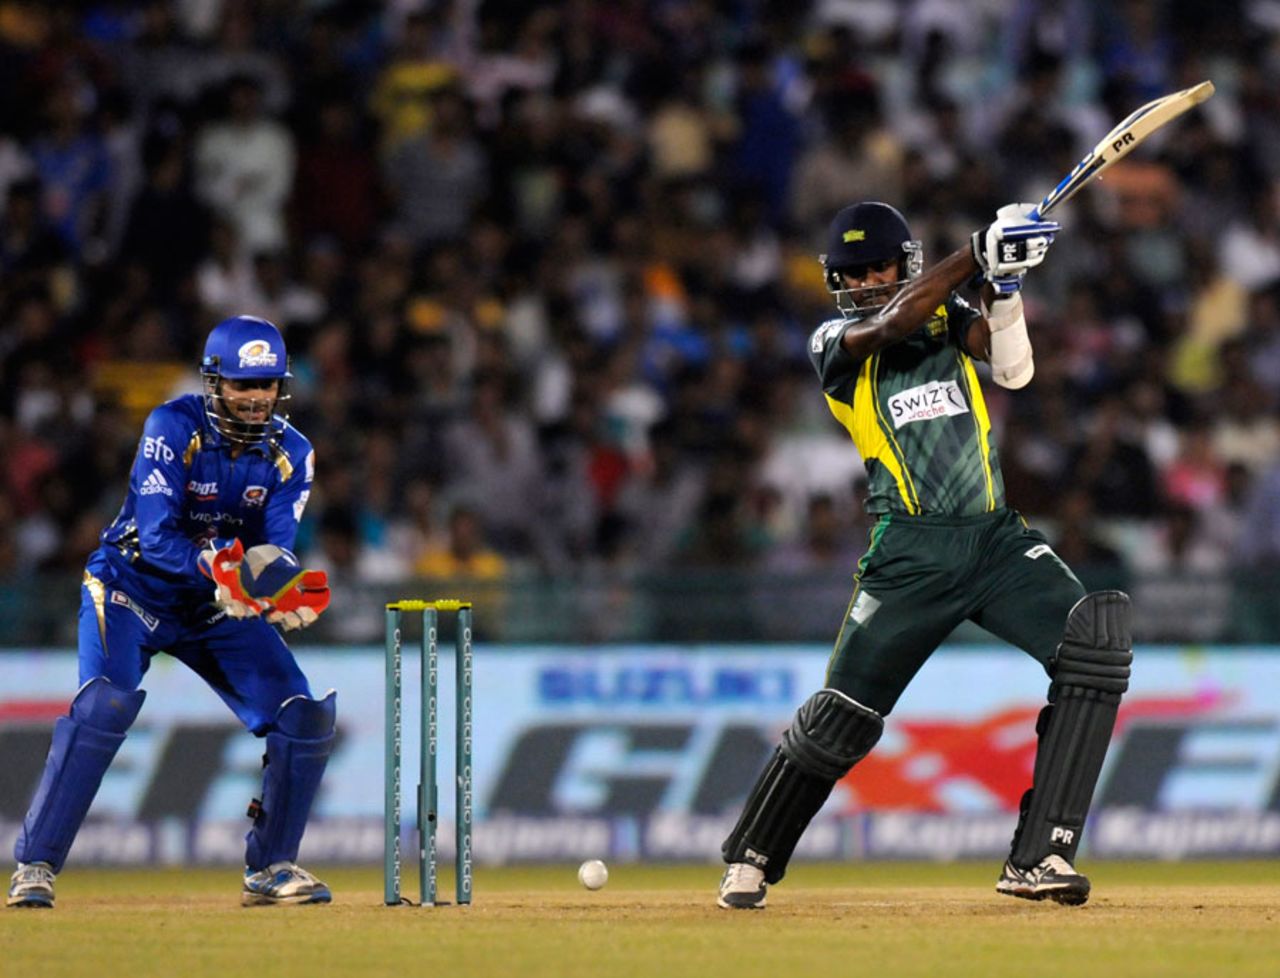 Farveez Maharoof clubs the ball during his 22-ball 41, Mumbai Indians v Southern Express, CLT20, Raipur, September 14, 2014